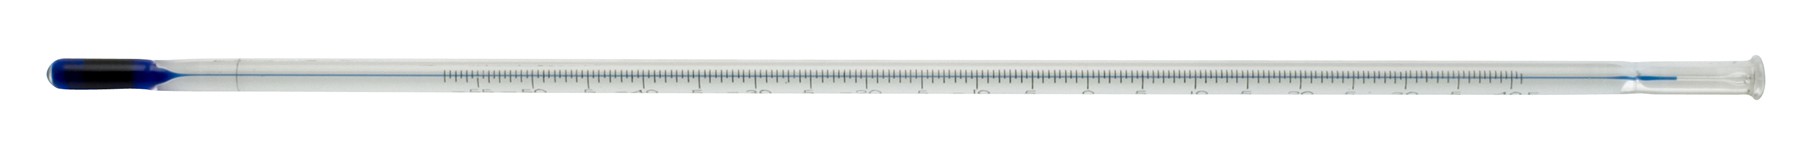 H-B DURAC Plus ASTM Like Liquid-In-Glass Thermometer; 15C / Low Softening Point, Total Immersion, -2 to 80C, Organic Liquid Fill